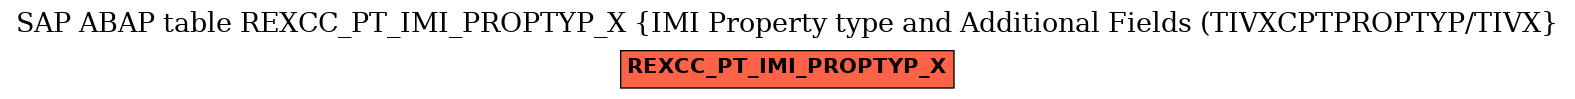 E-R Diagram for table REXCC_PT_IMI_PROPTYP_X (IMI Property type and Additional Fields (TIVXCPTPROPTYP/TIVX)